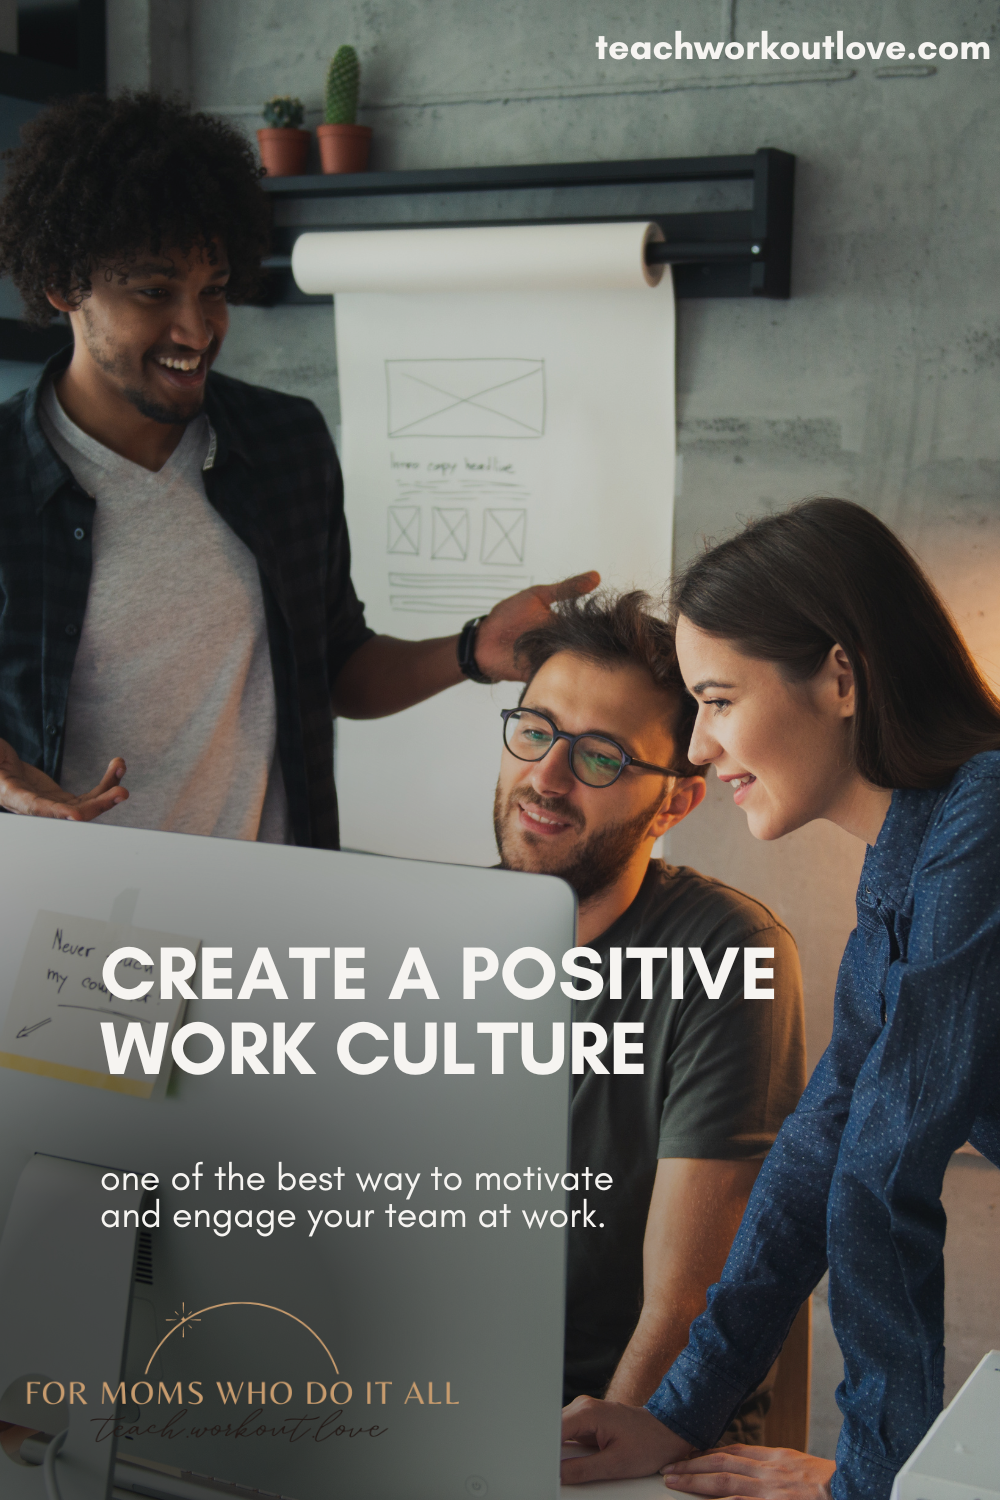 Create a Positive Work Culture is the best way to motivate your team - TWL